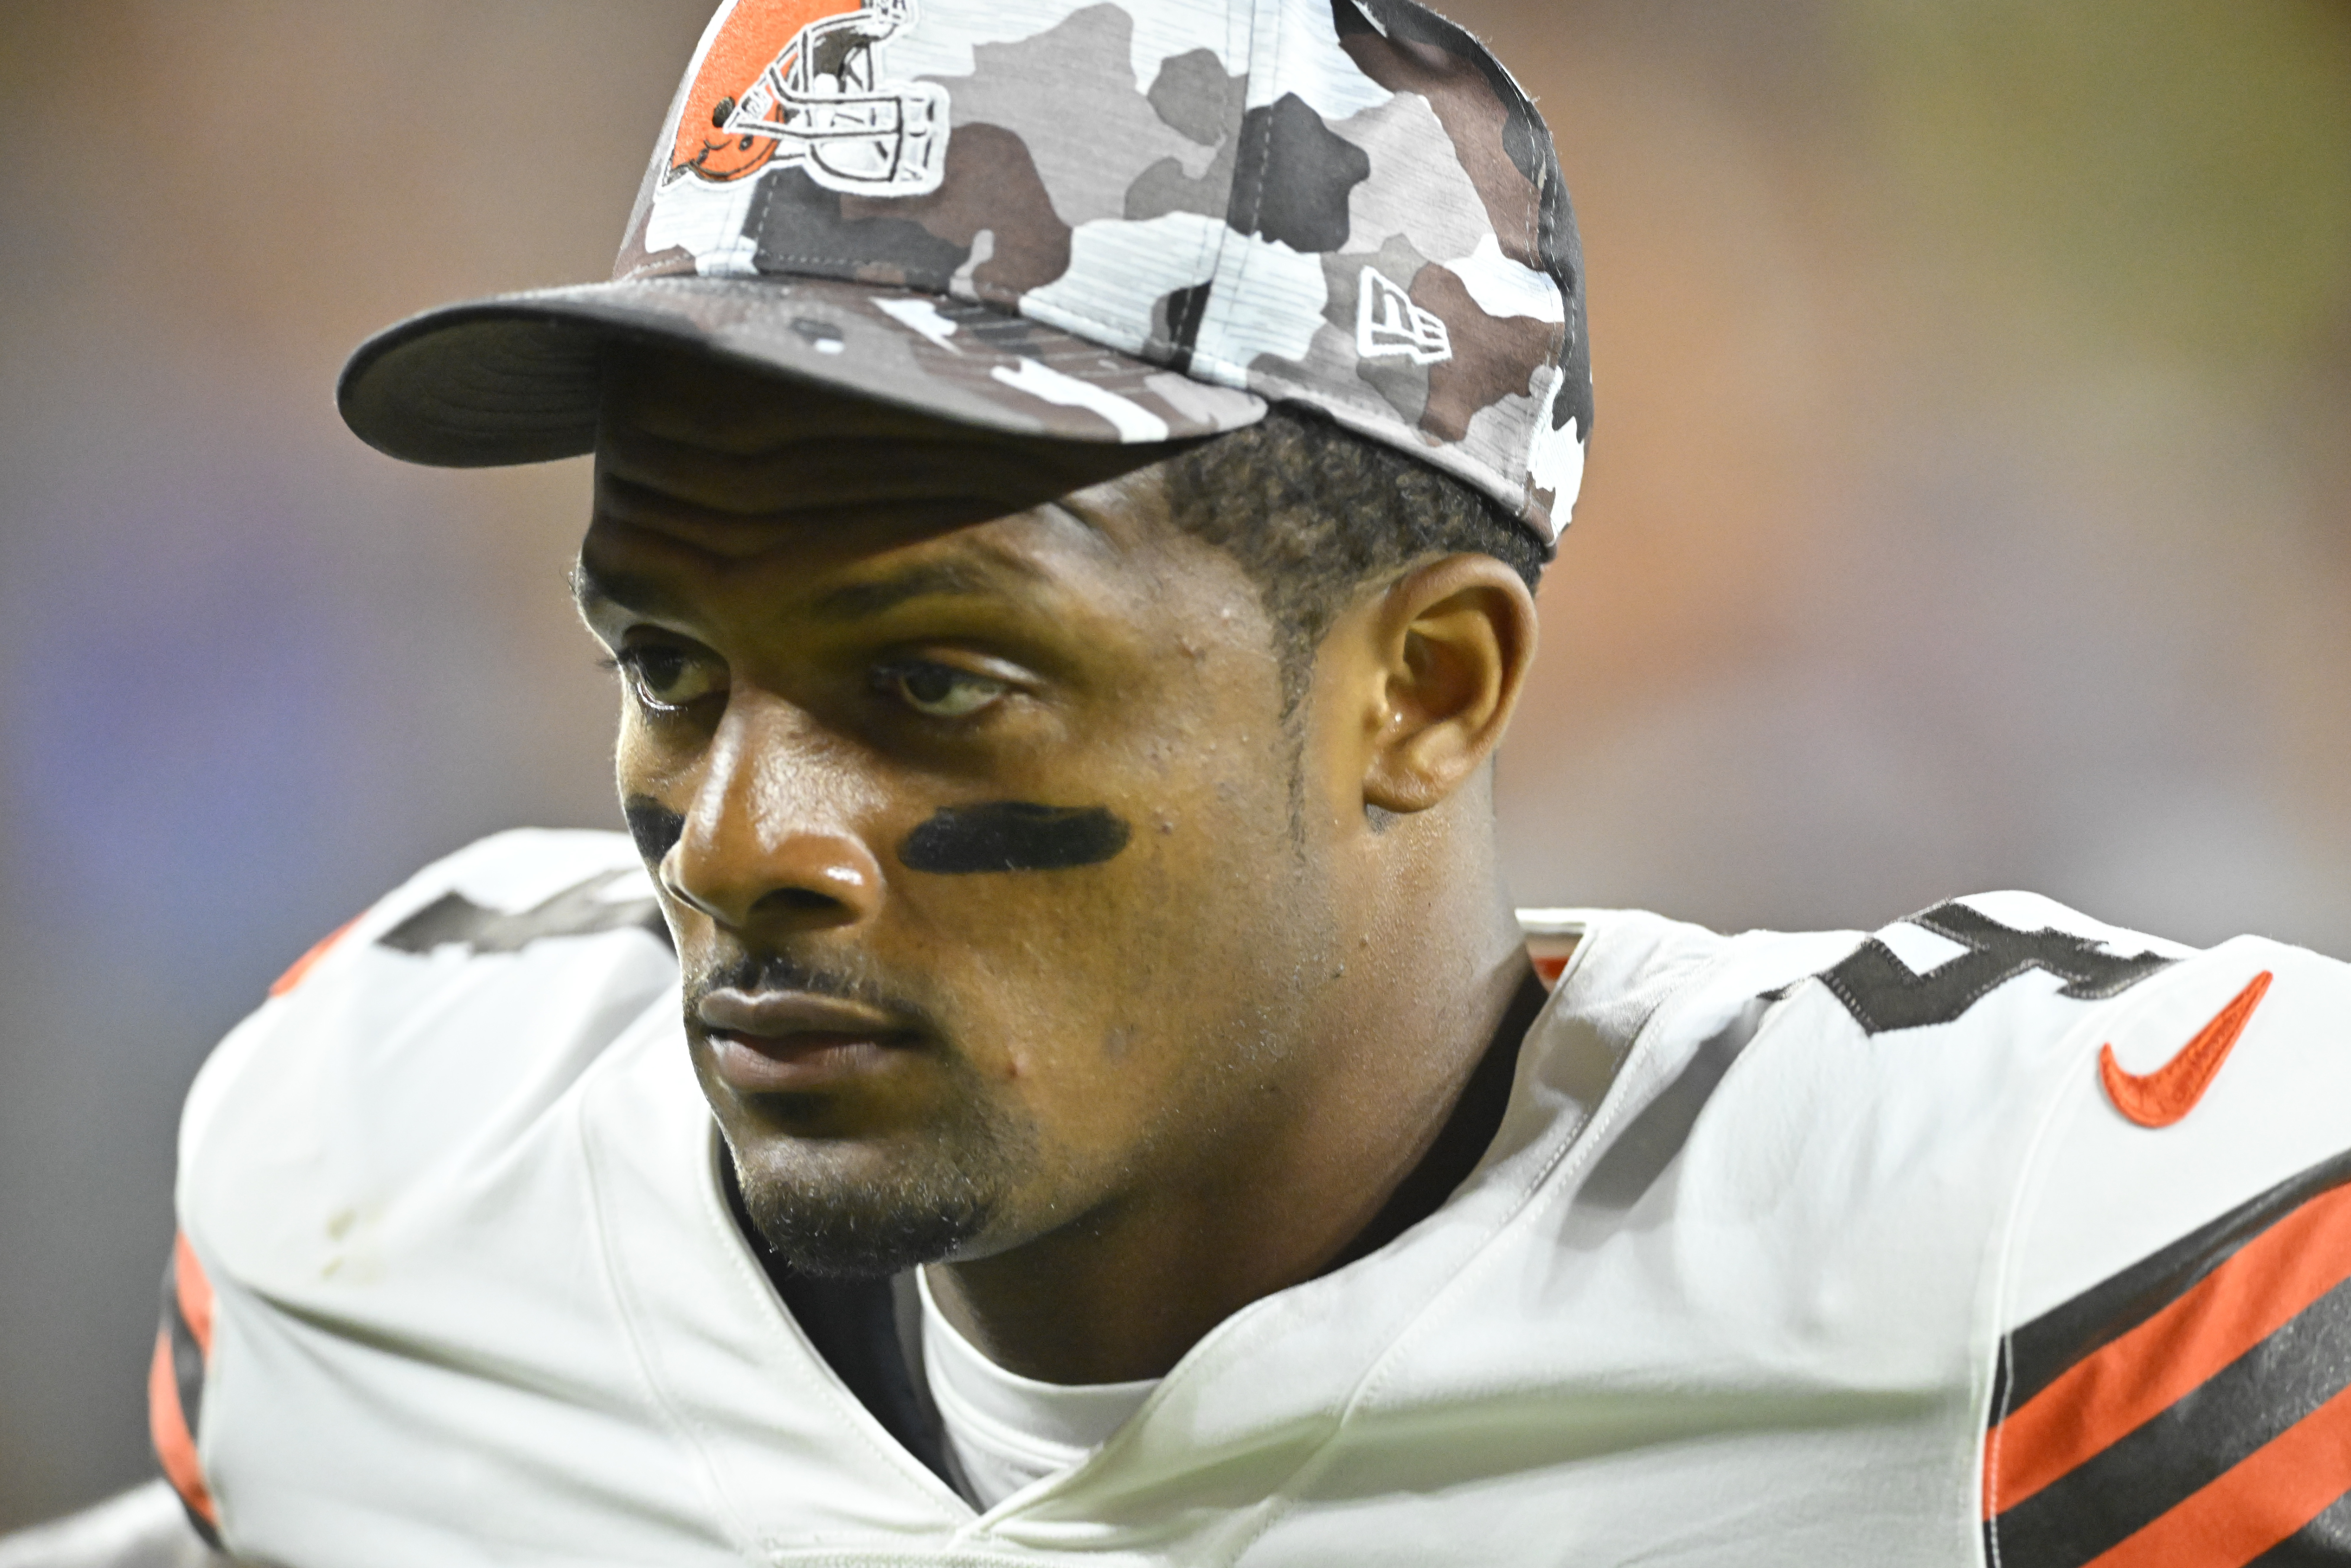 Browns general manager: Deshaun Watson to start against Texans on Dec. 4